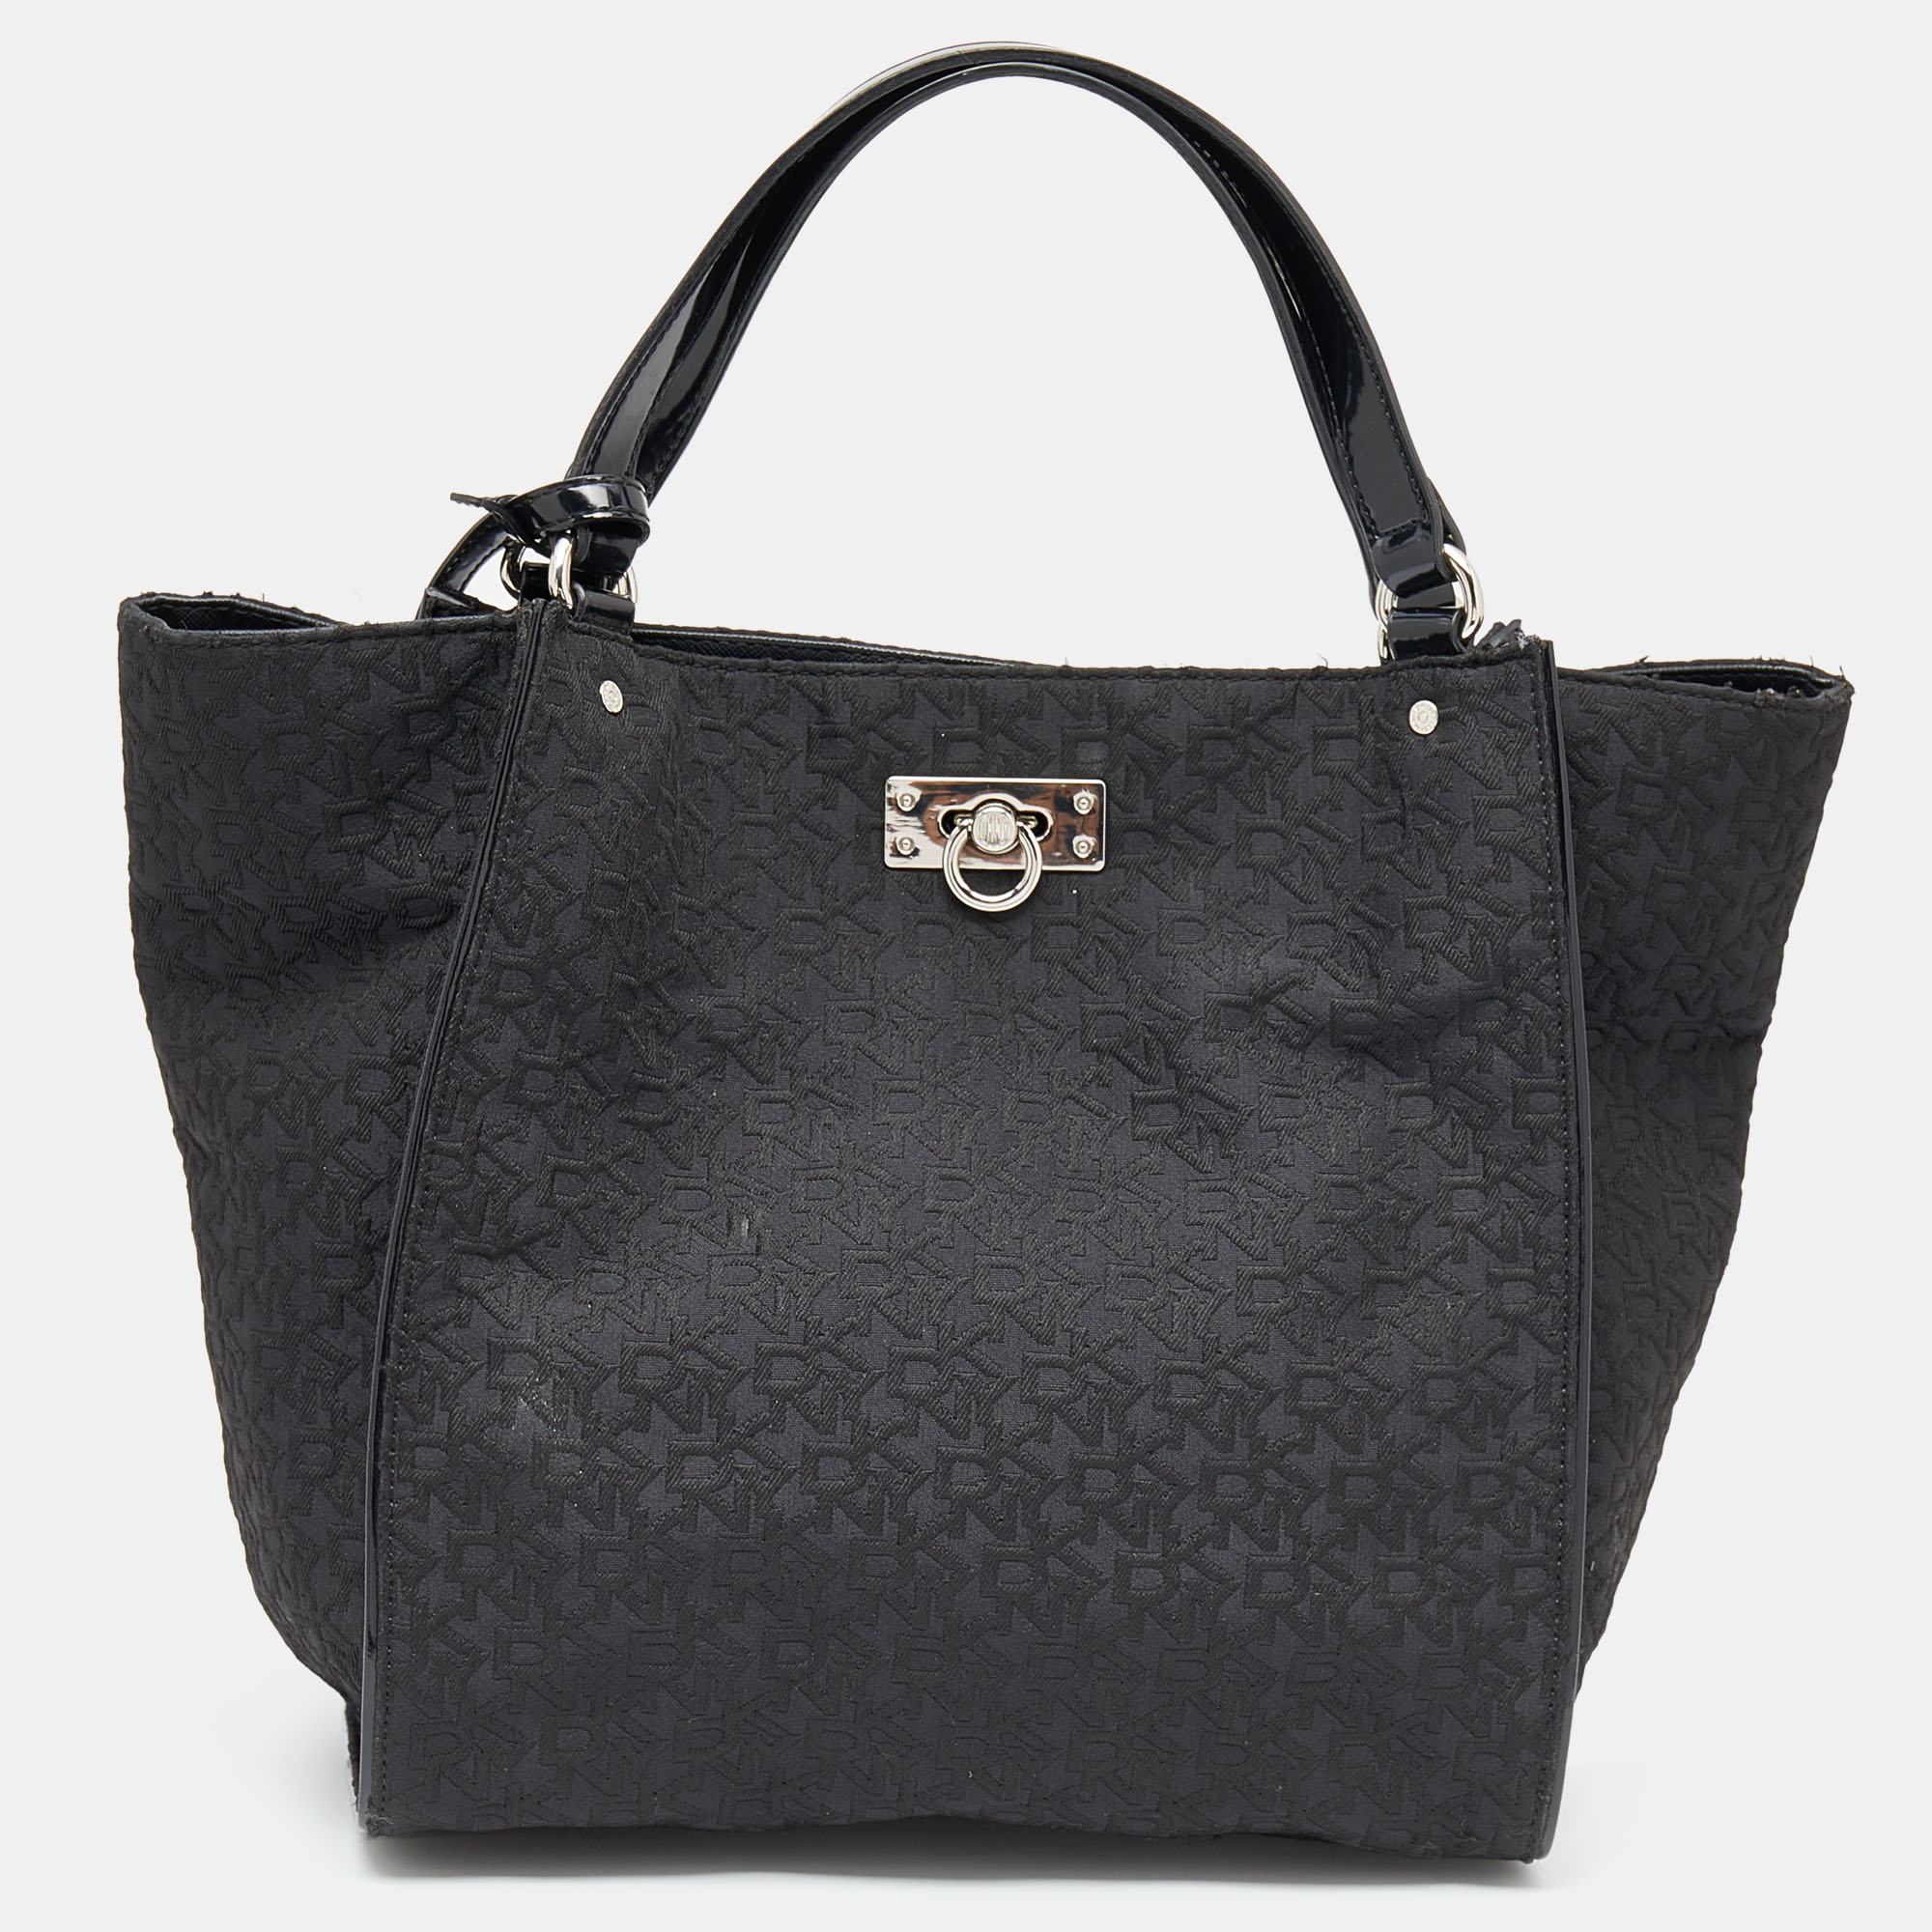 

DKNY Black Monogram Canvas And Patent Leather Tote